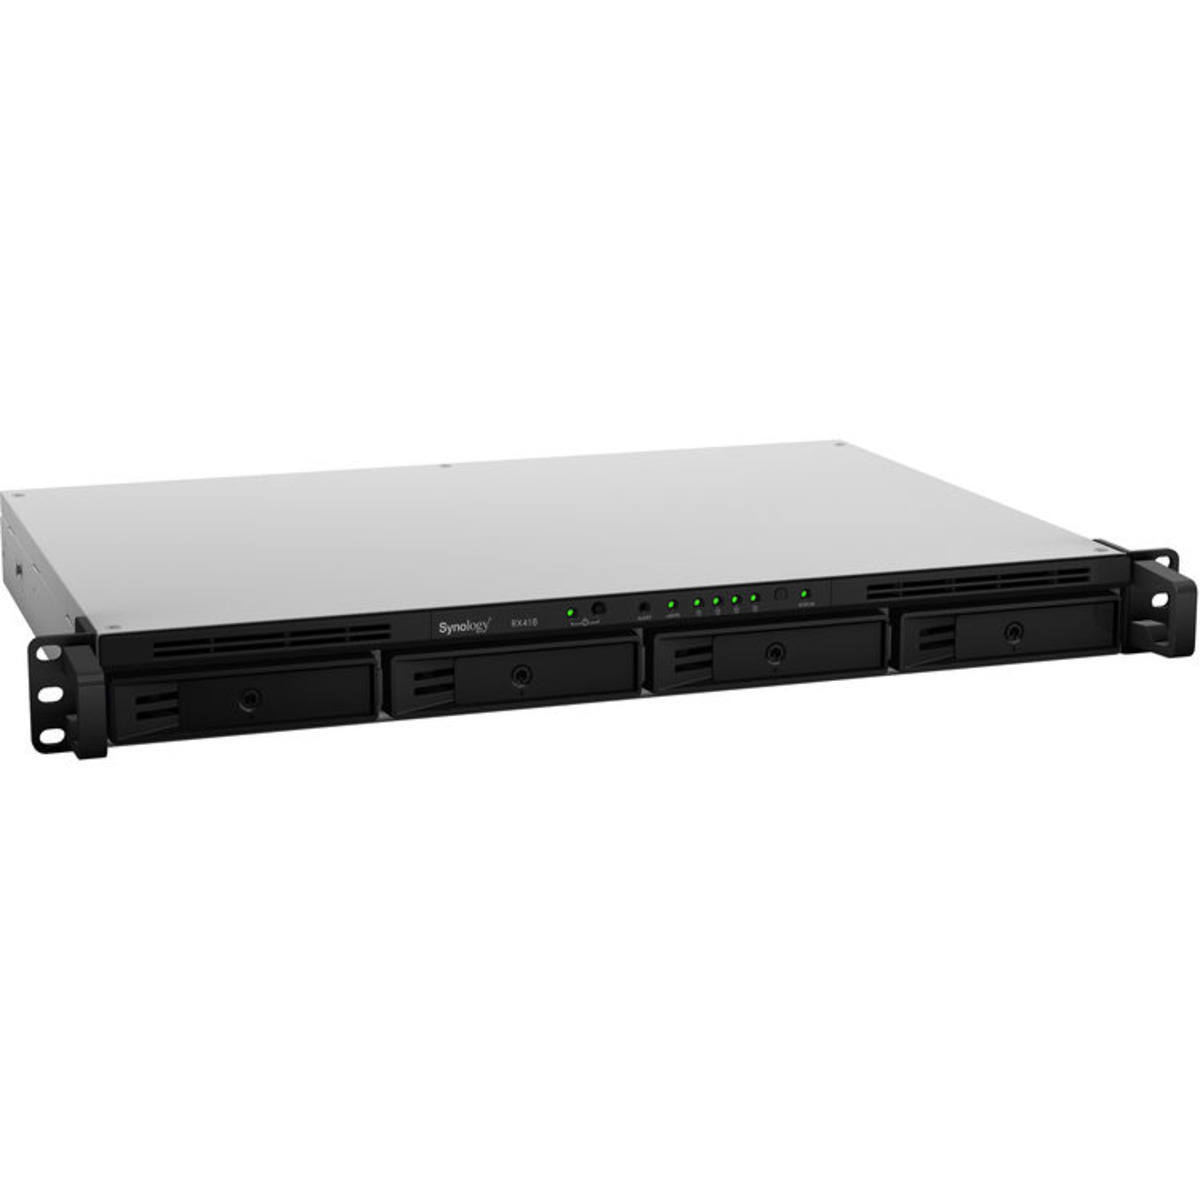 Synology RX418 External Expansion Drive 36tb 4-Bay RackMount Multimedia / Power User / Business Expansion Enclosure 3x12tb Toshiba Enterprise Capacity MG07ACA12TE 3.5 7200rpm SATA 6Gb/s HDD ENTERPRISE Class Drives Installed - Burn-In Tested RX418 External Expansion Drive